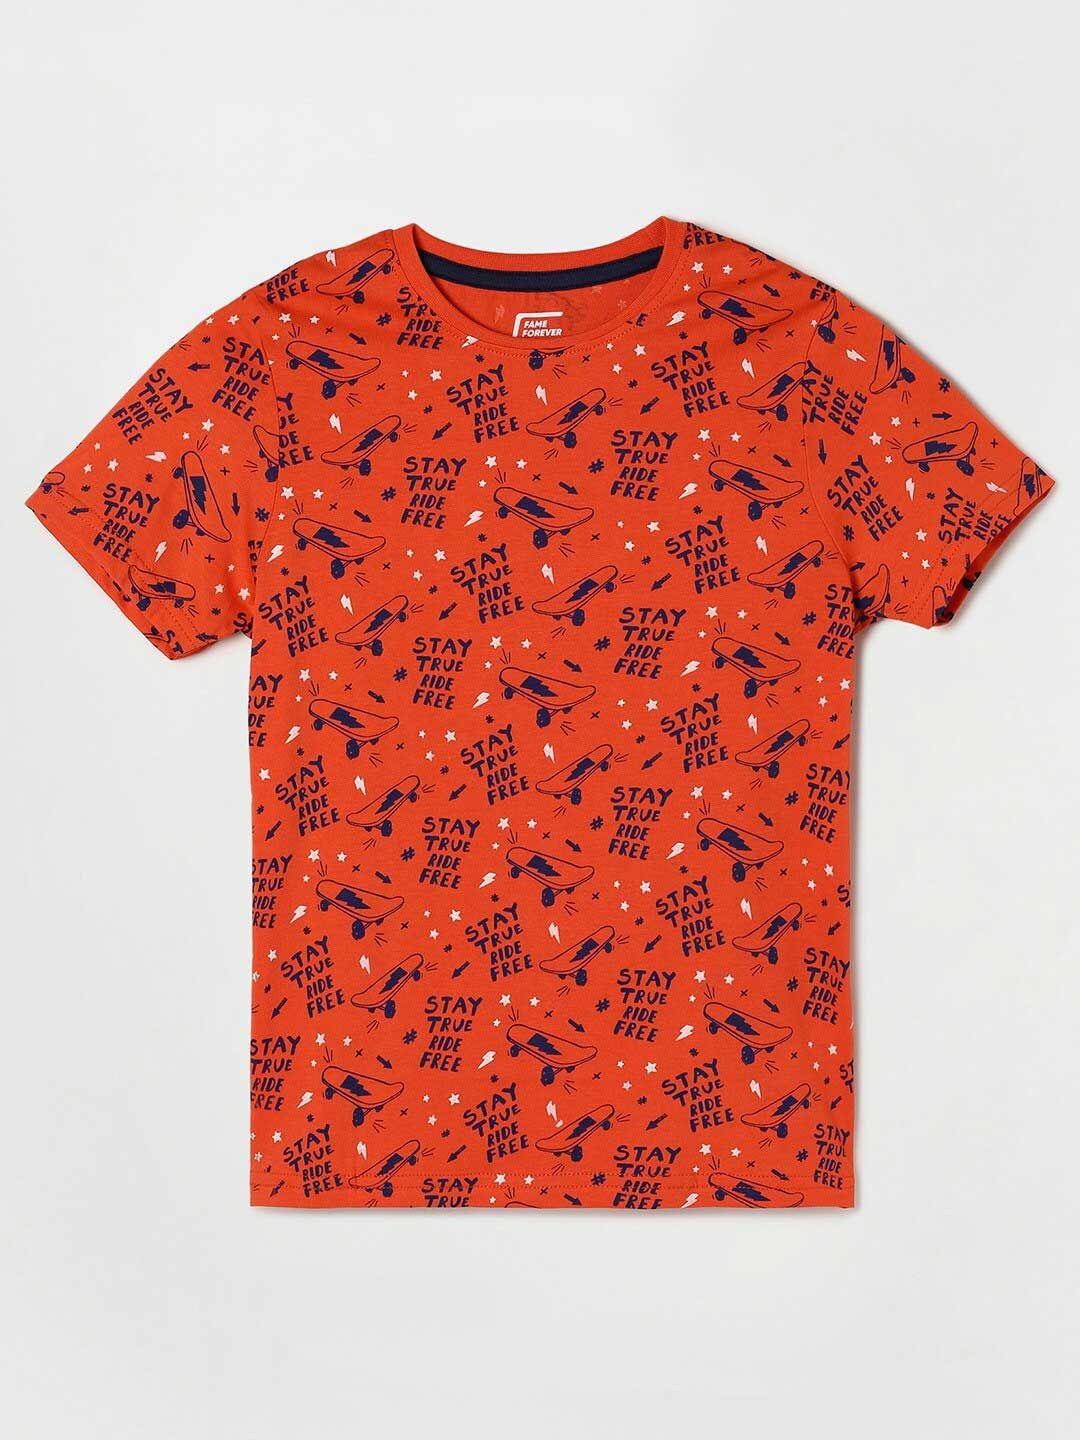 fame-forever-by-lifestyle-boys-orange-printed-t-shirt